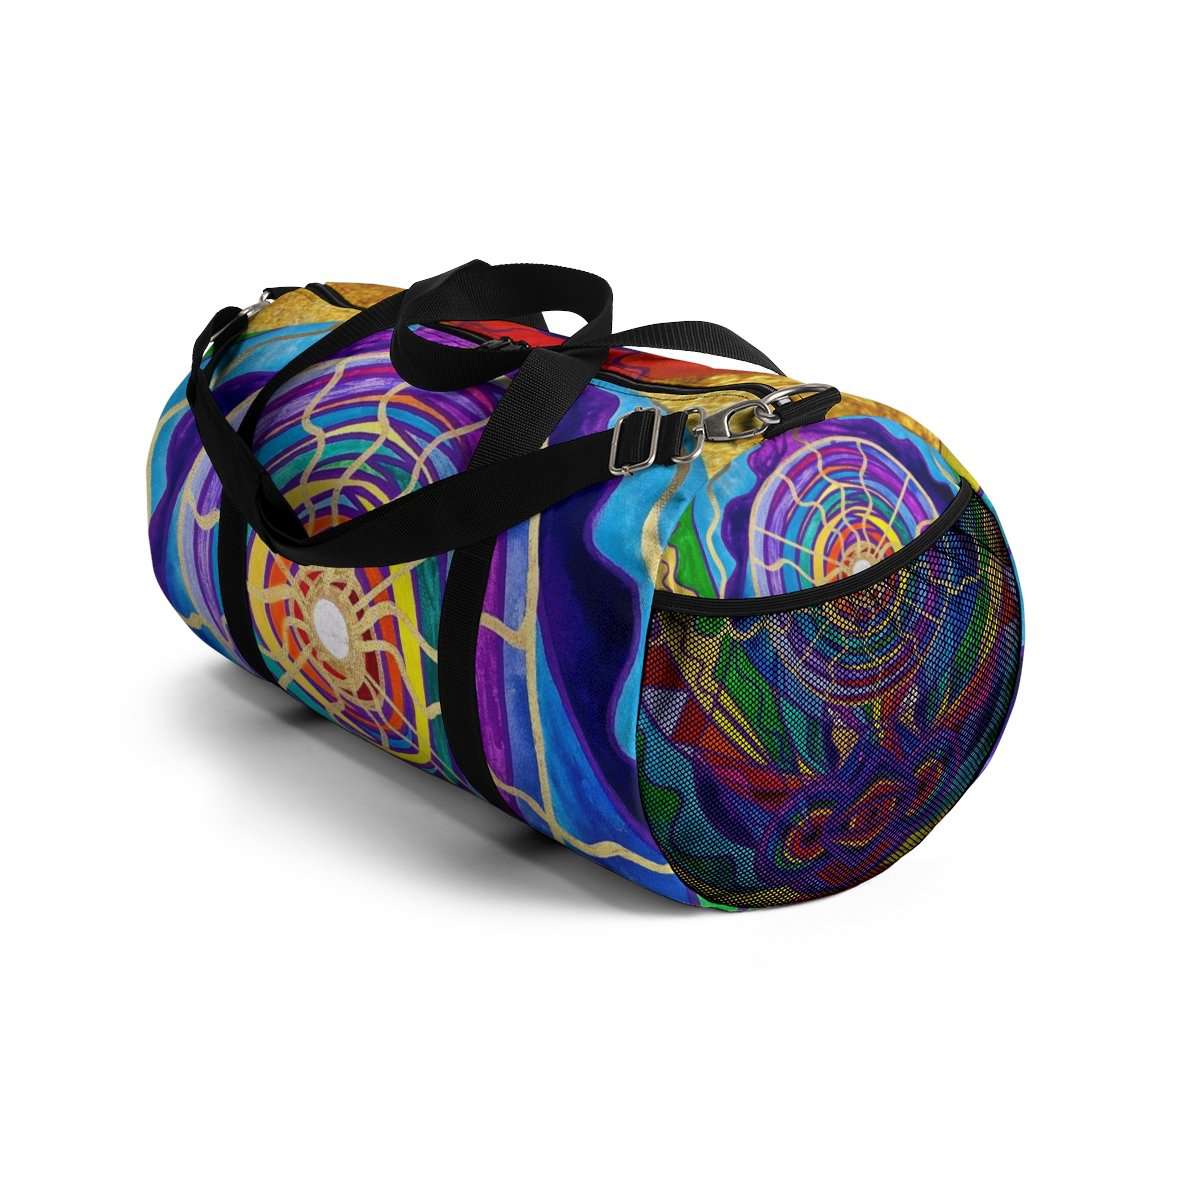 we-have-the-best-selection-of-raise-your-vibration-duffle-bag-online_8.jpg